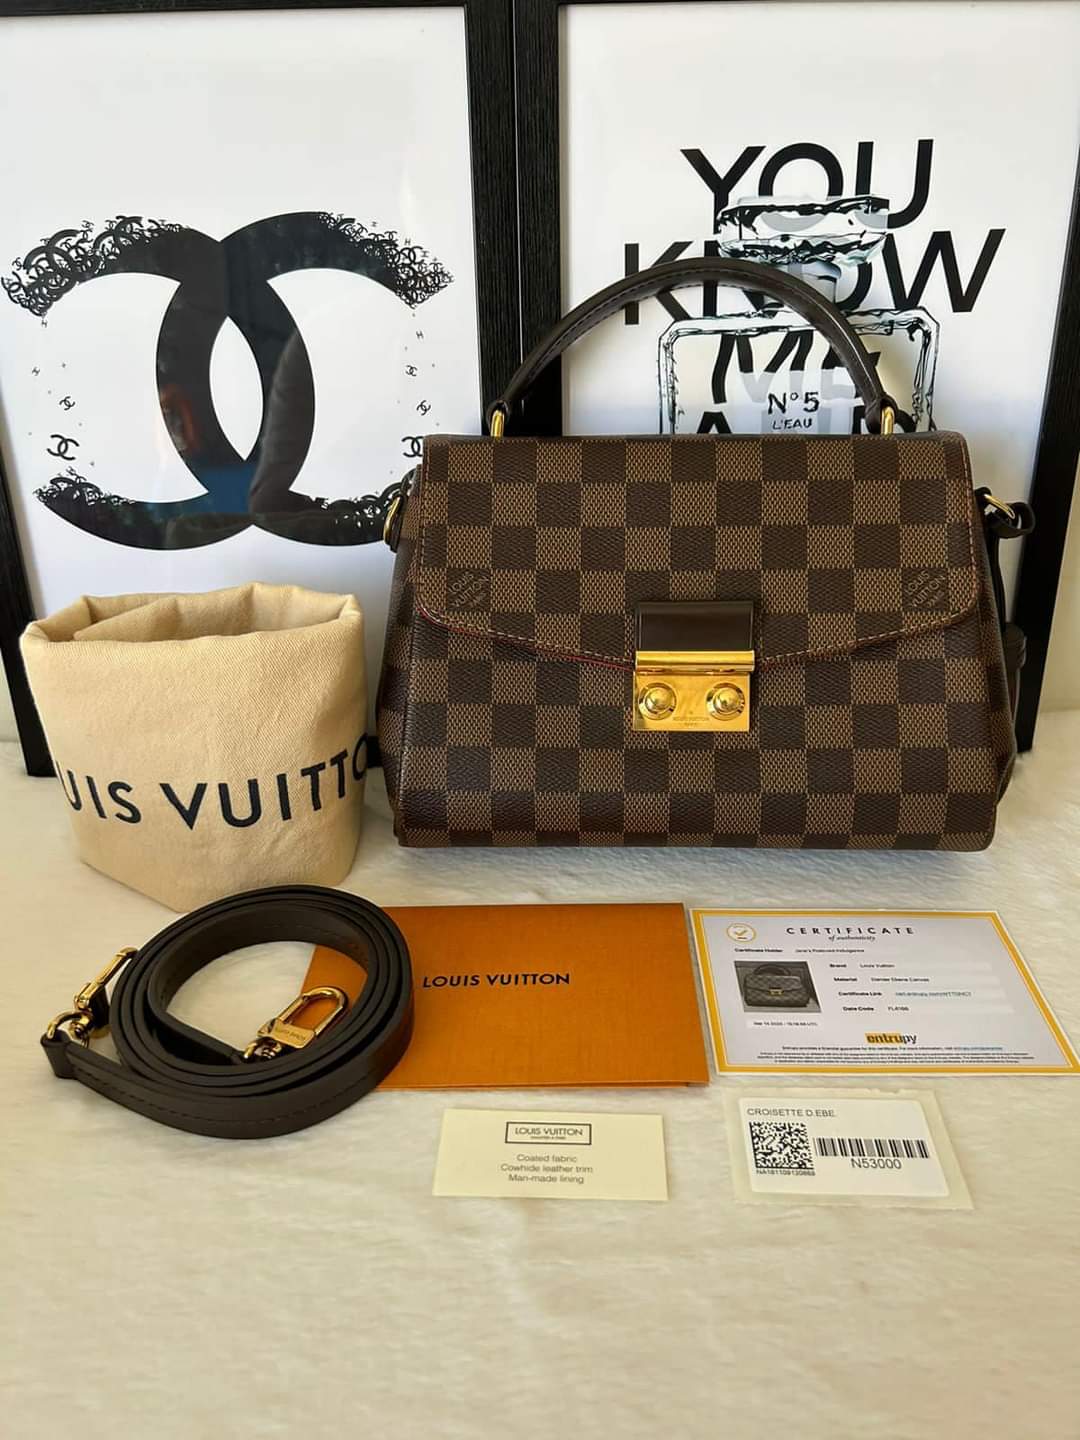 LOUIS VUITTON & DIOR  PRICES of LV & DIOR Bags in the Philippines